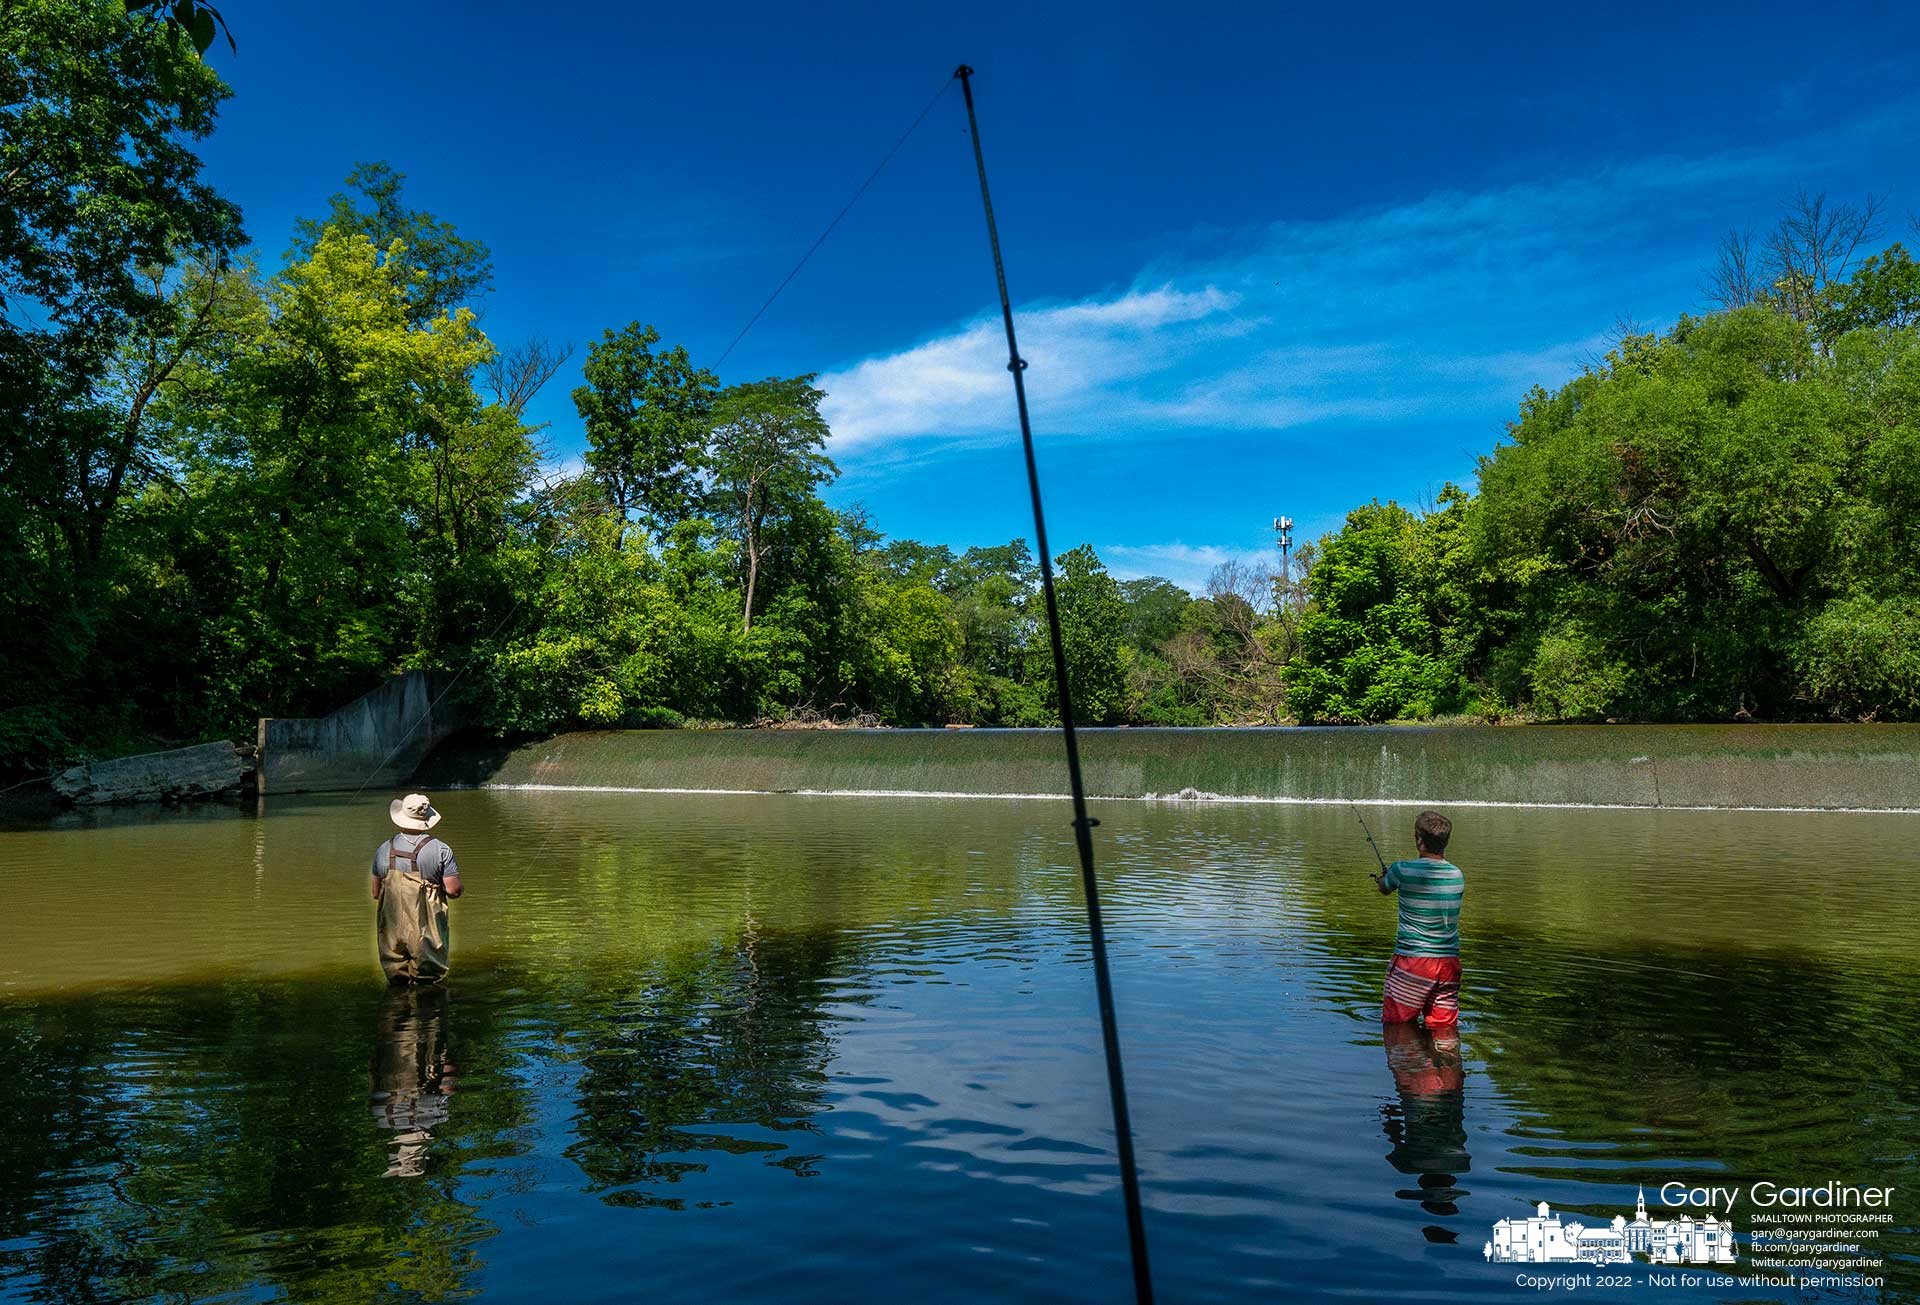 A pair of fisherman cast for muskie just below the spillway at the Alum Creek Park low-head dam. My Final Photo for July 15, 2022.